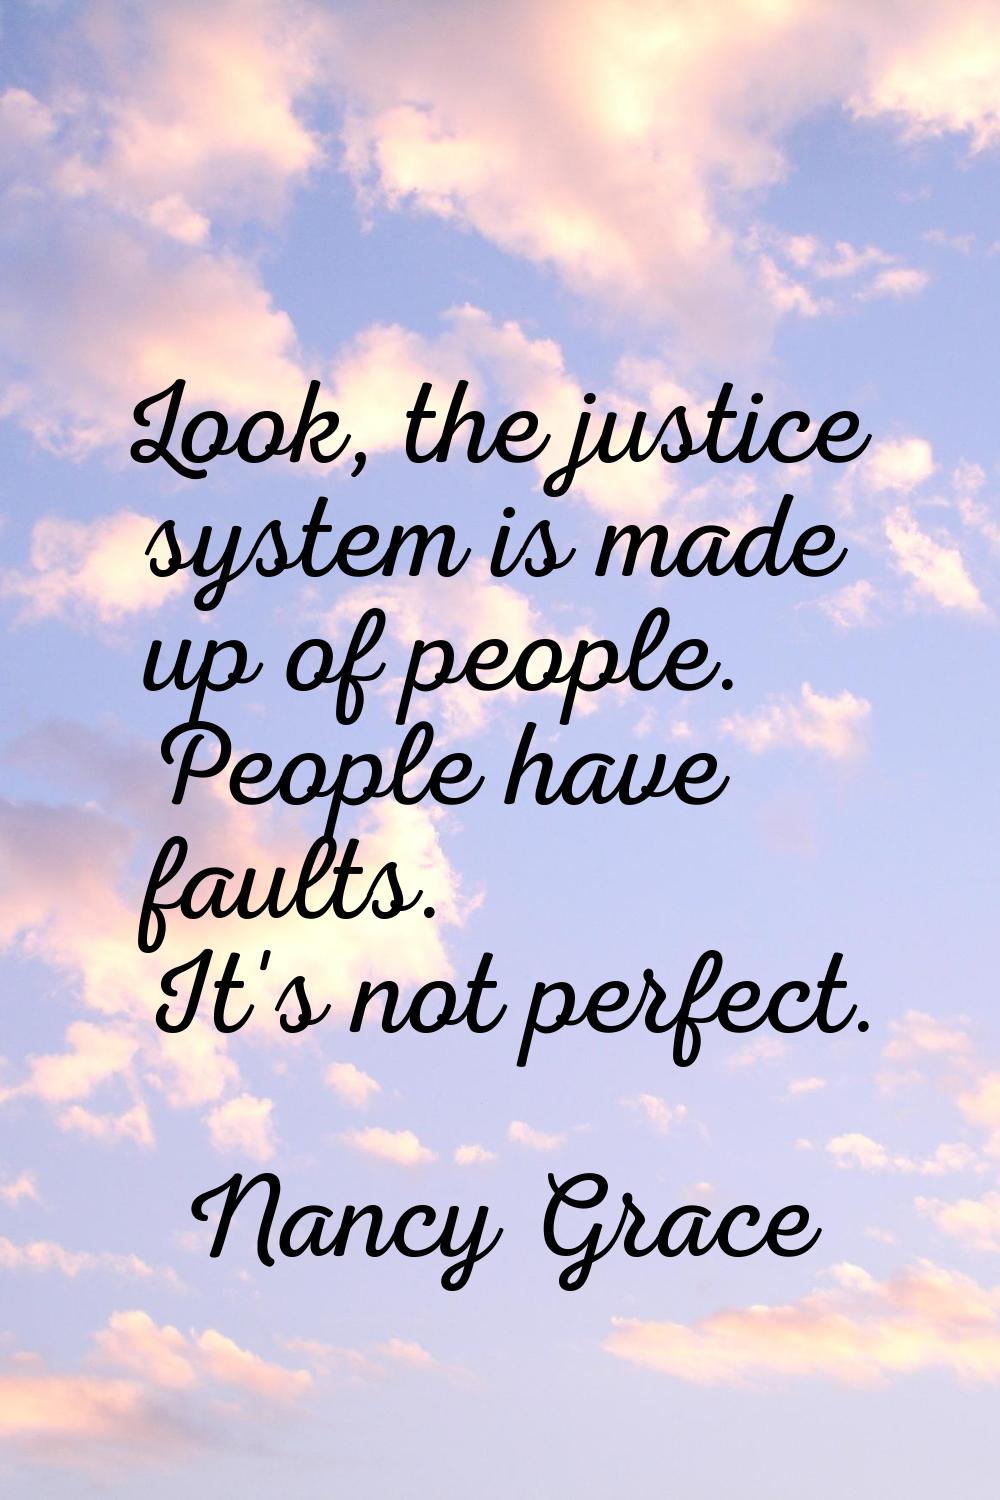 Look, the justice system is made up of people. People have faults. It's not perfect.